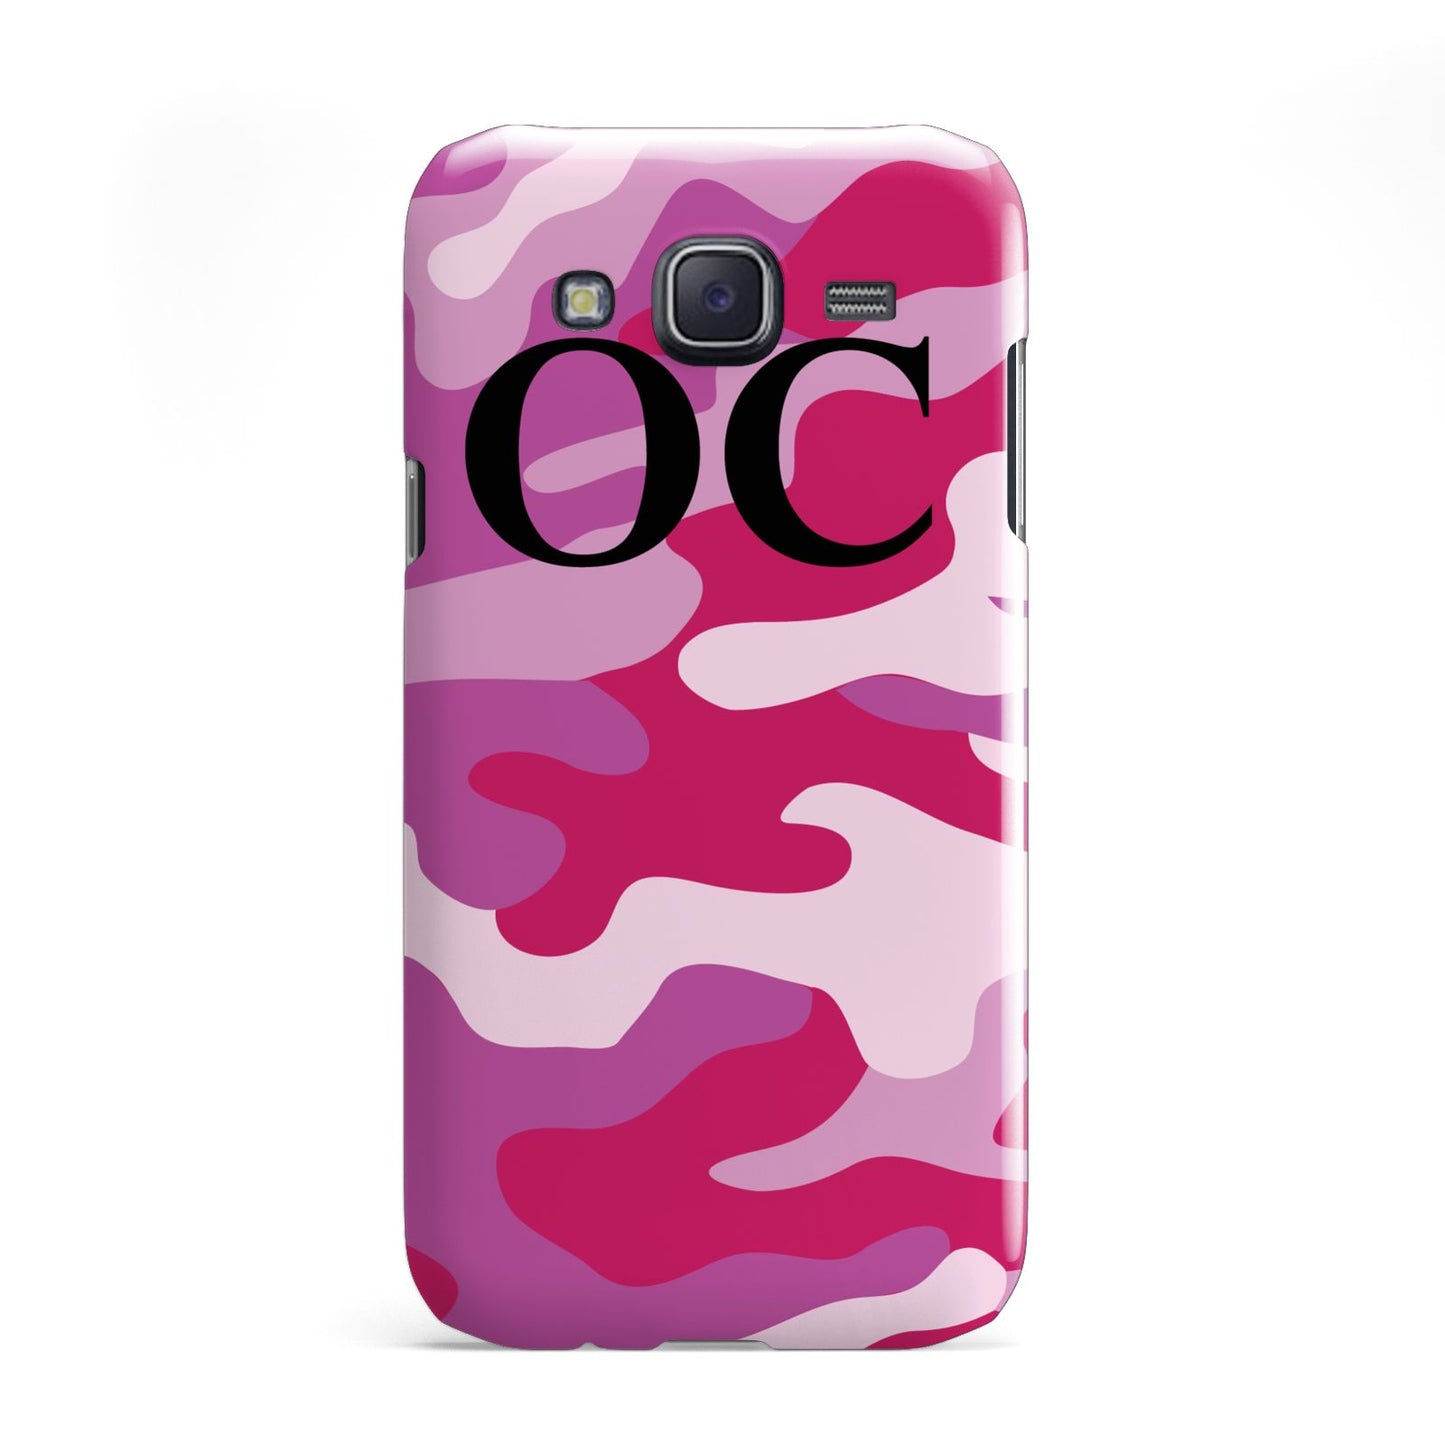 Camouflage Personalised Samsung Galaxy J5 Case